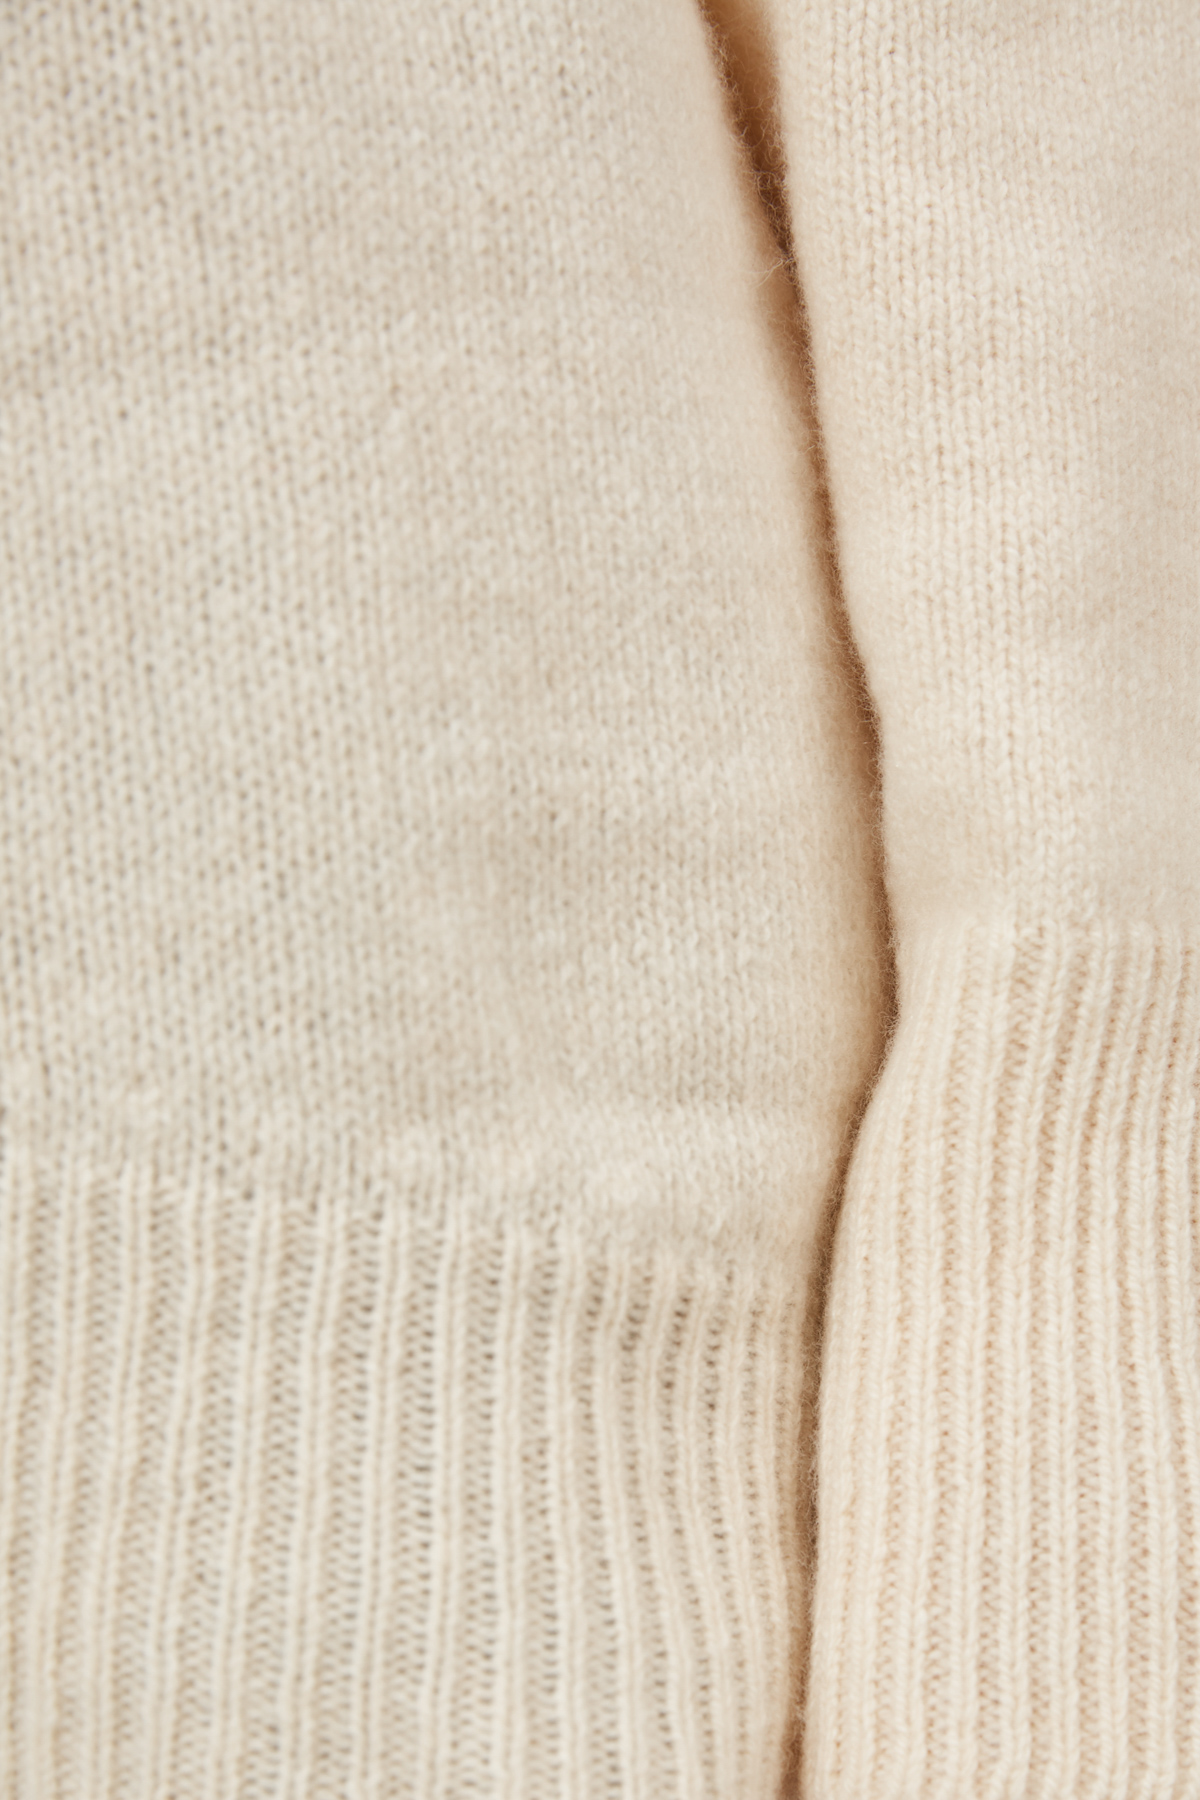 Cashmere milk knitted oversized sweater, photo 7